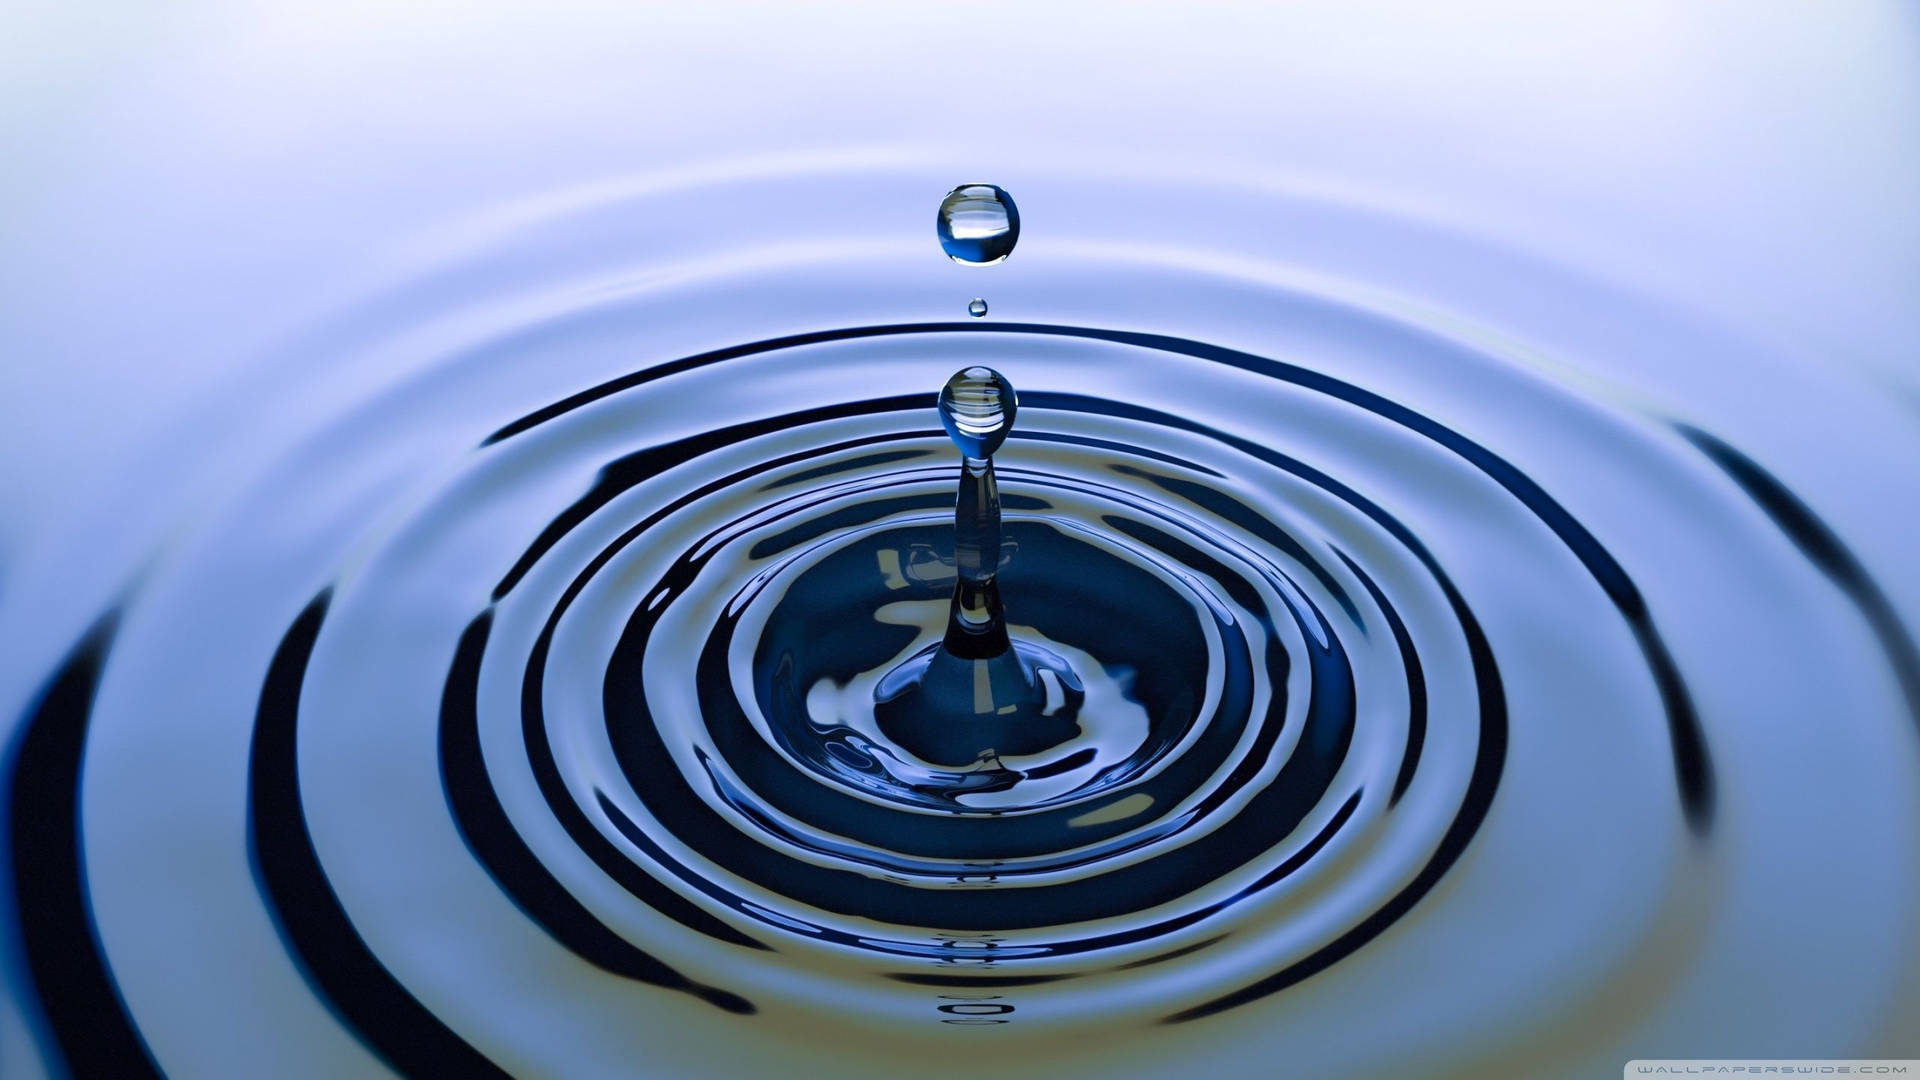 Double Droplets And Rippling Water Wallpaper